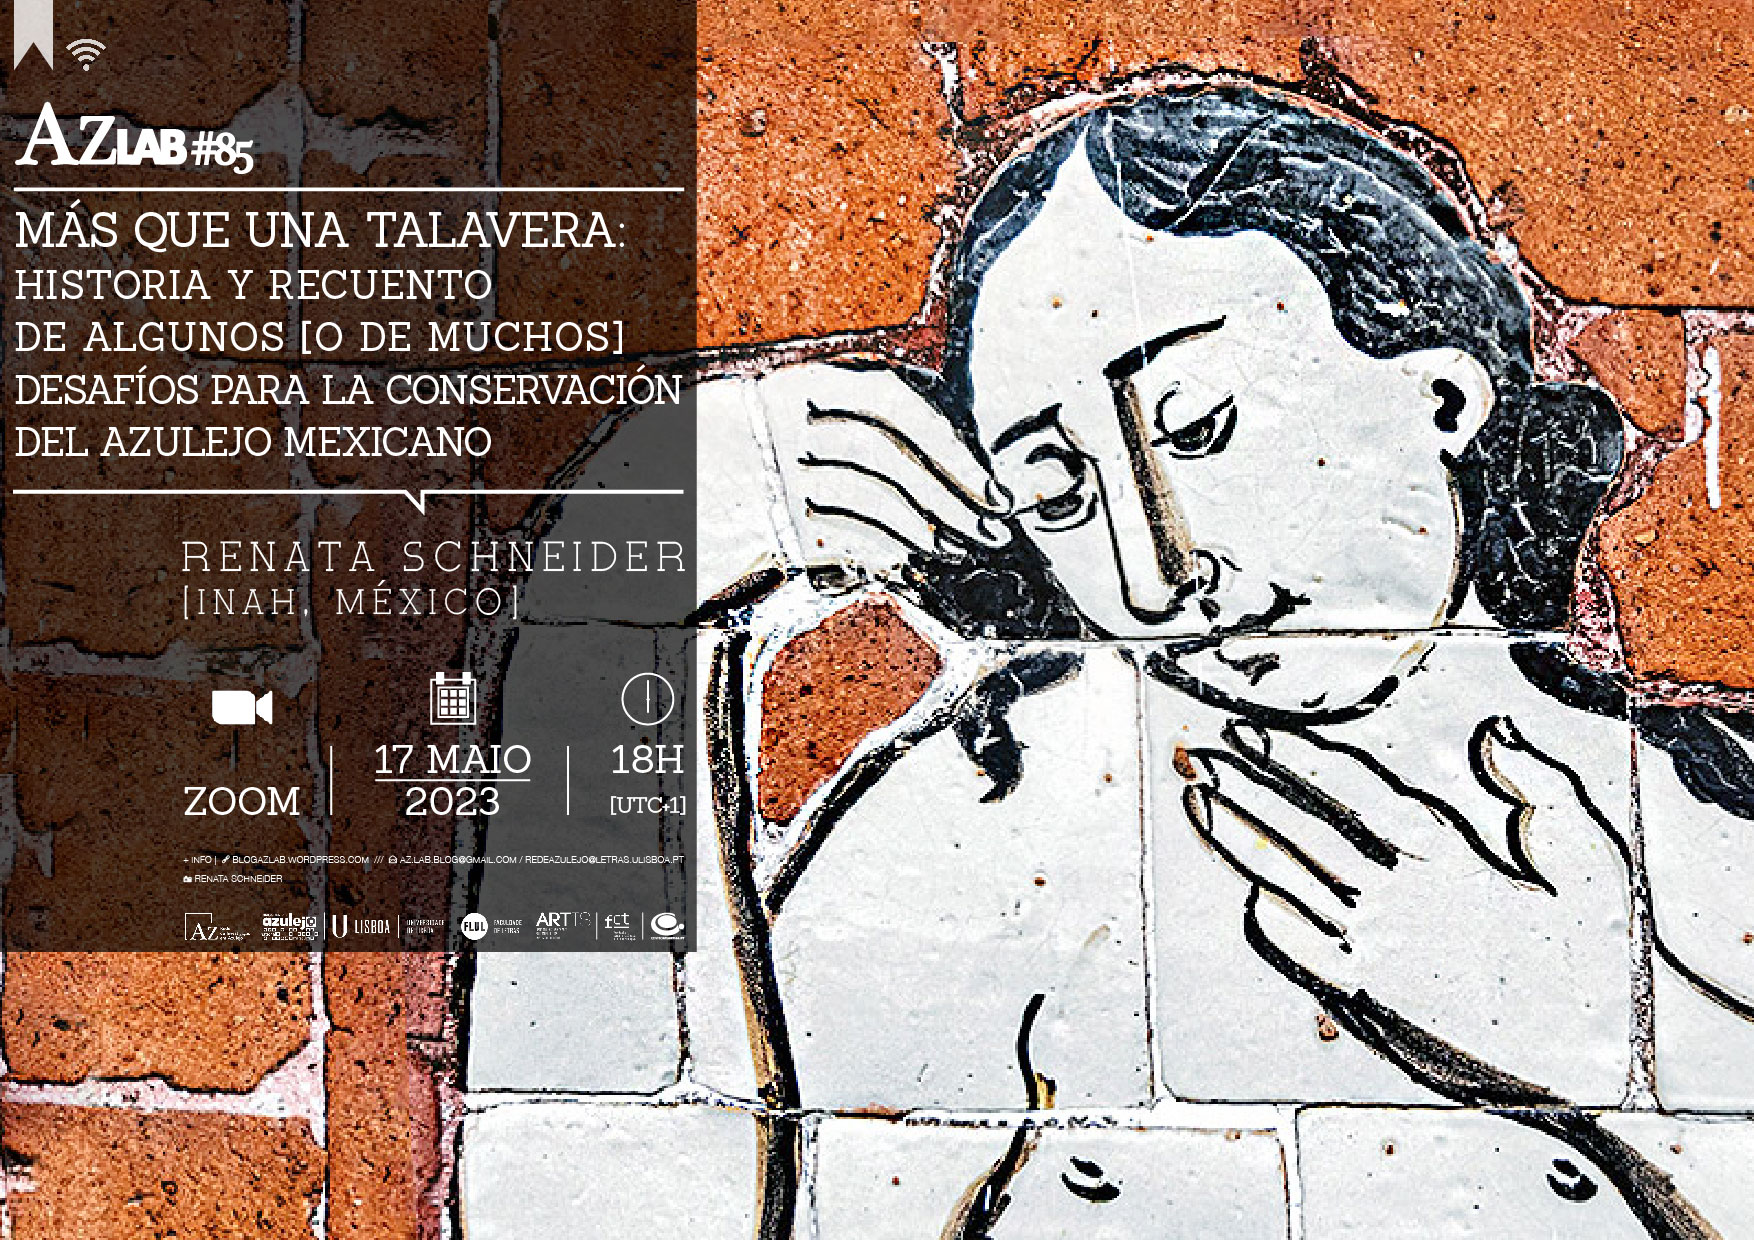 AzLab#85 | MORE THAN TALAVERA: THE HISTORY AND ACCOUNT OF SOME (OR MANY) CHALLENGES FOR THE CONSERVATION OF THE MEXICAN TILE